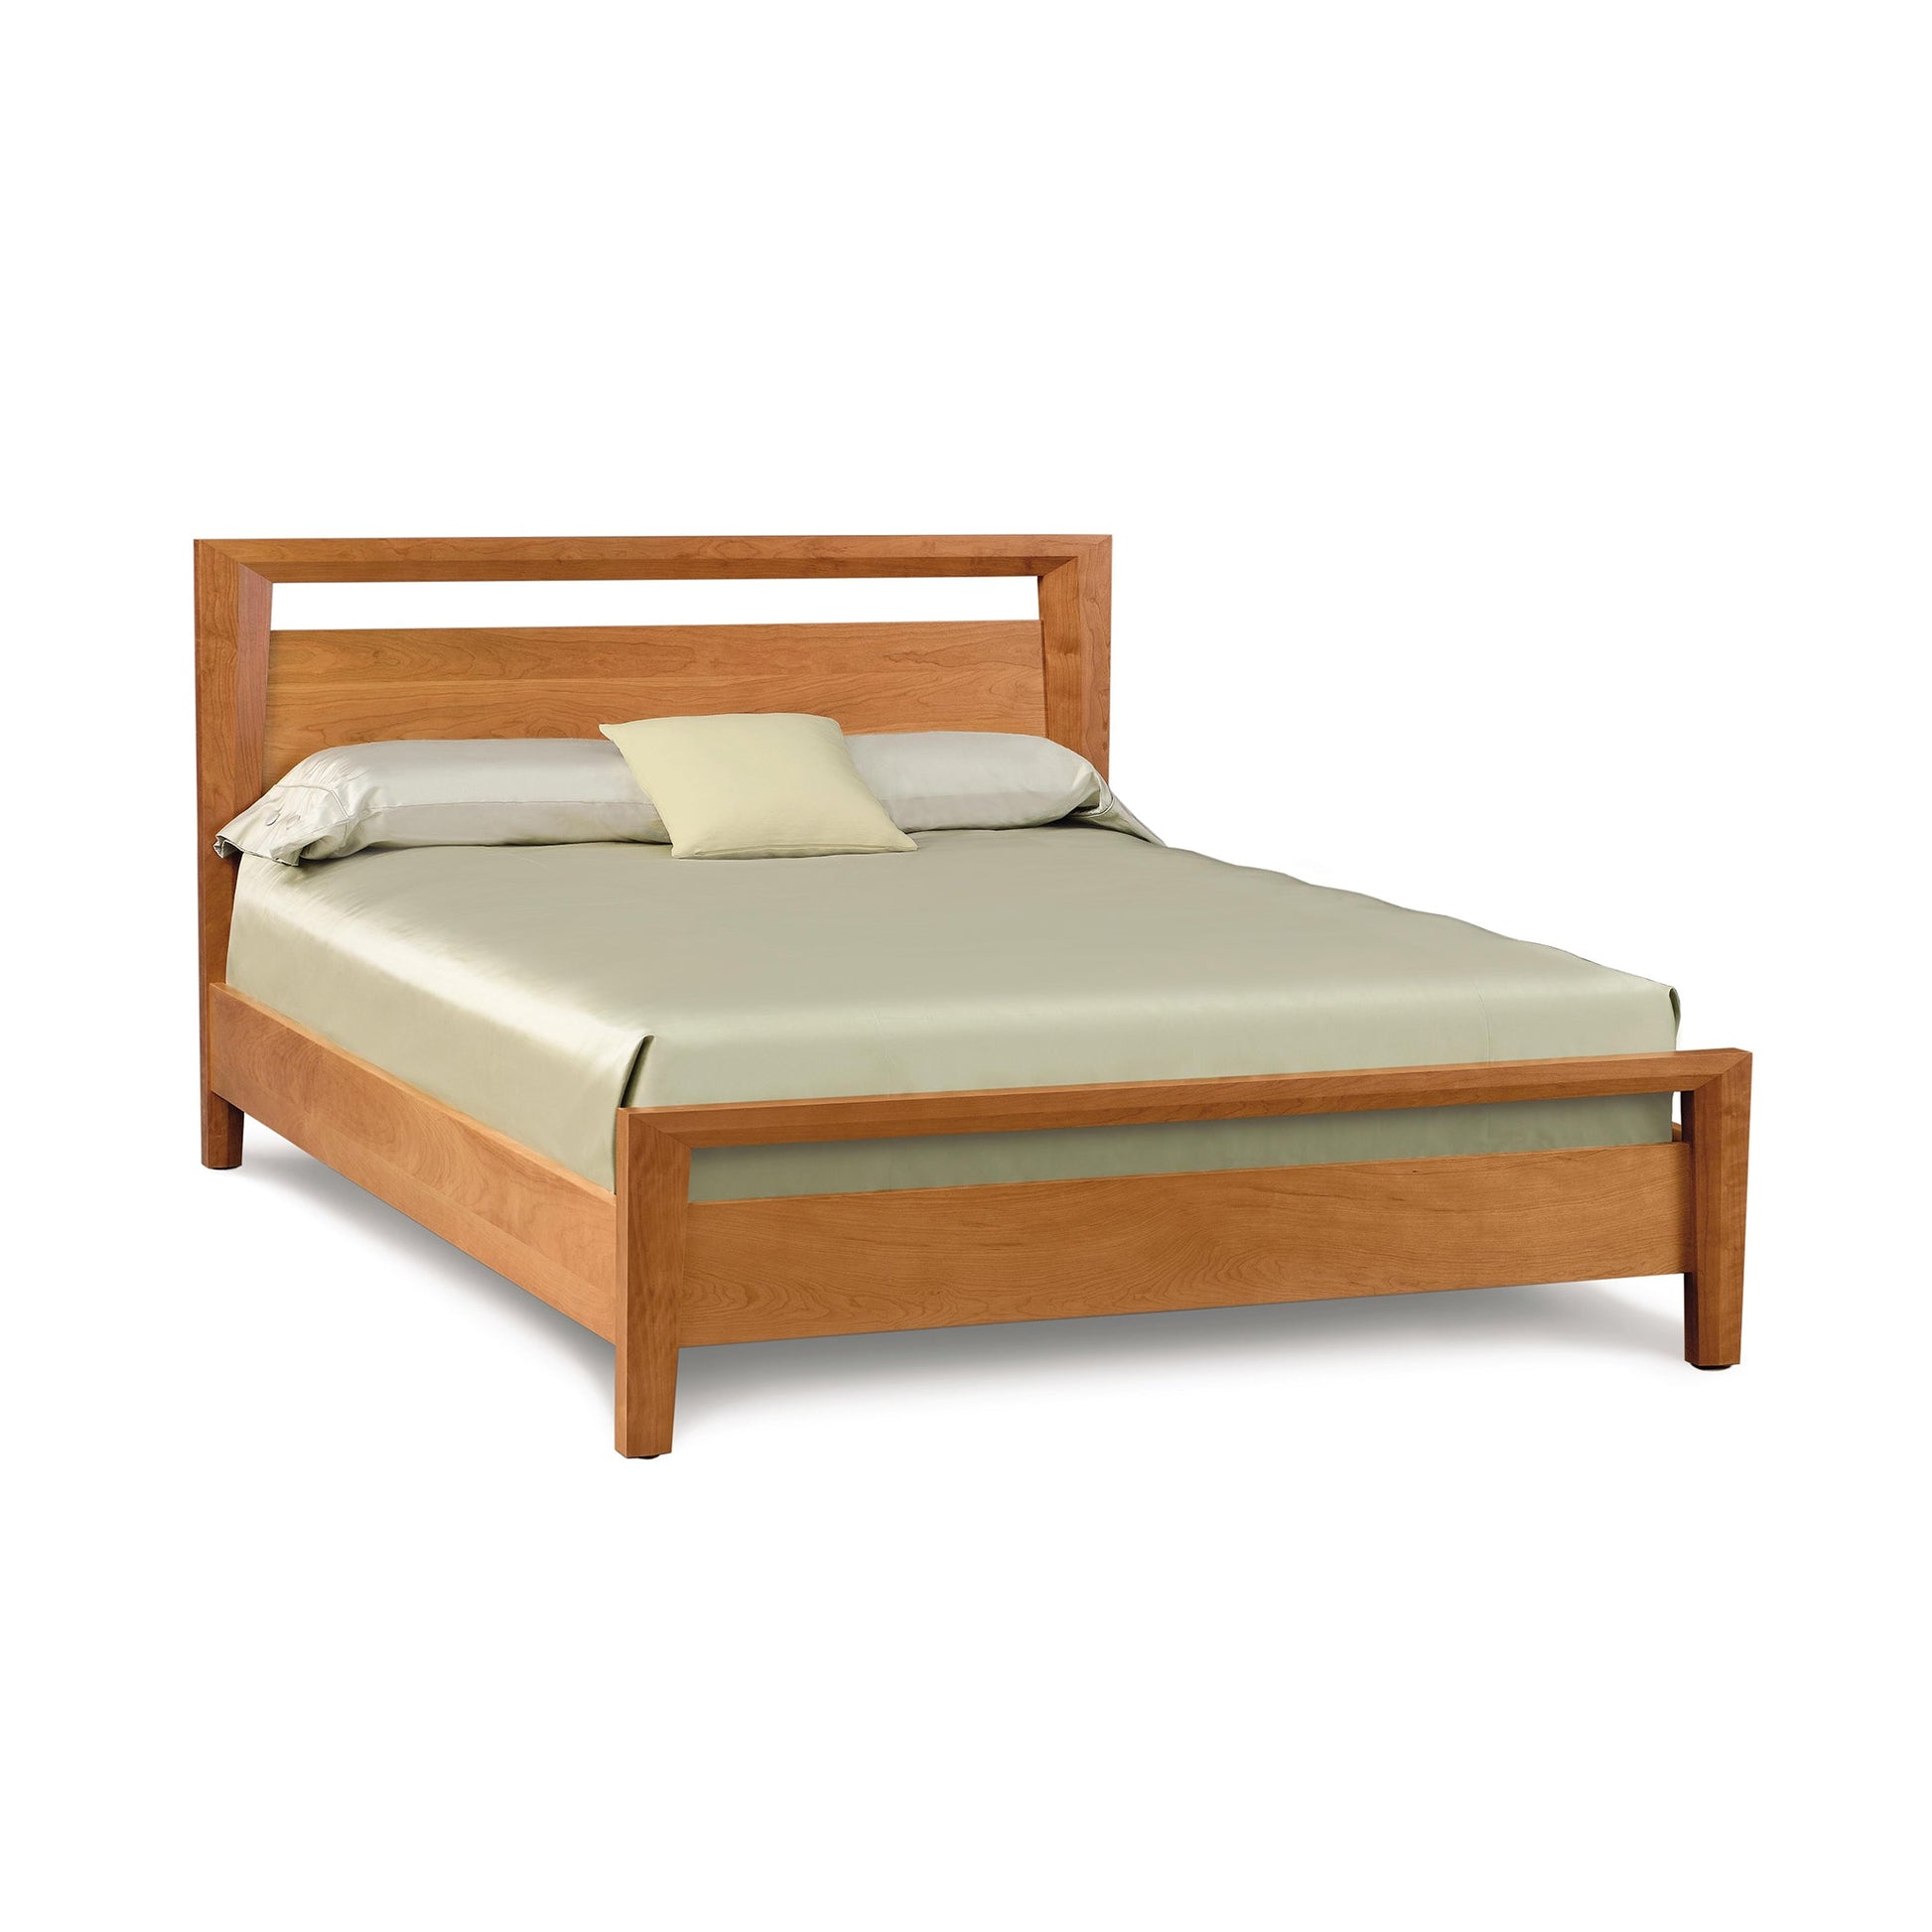 A wooden bed frame with a wooden headboard and footboard.